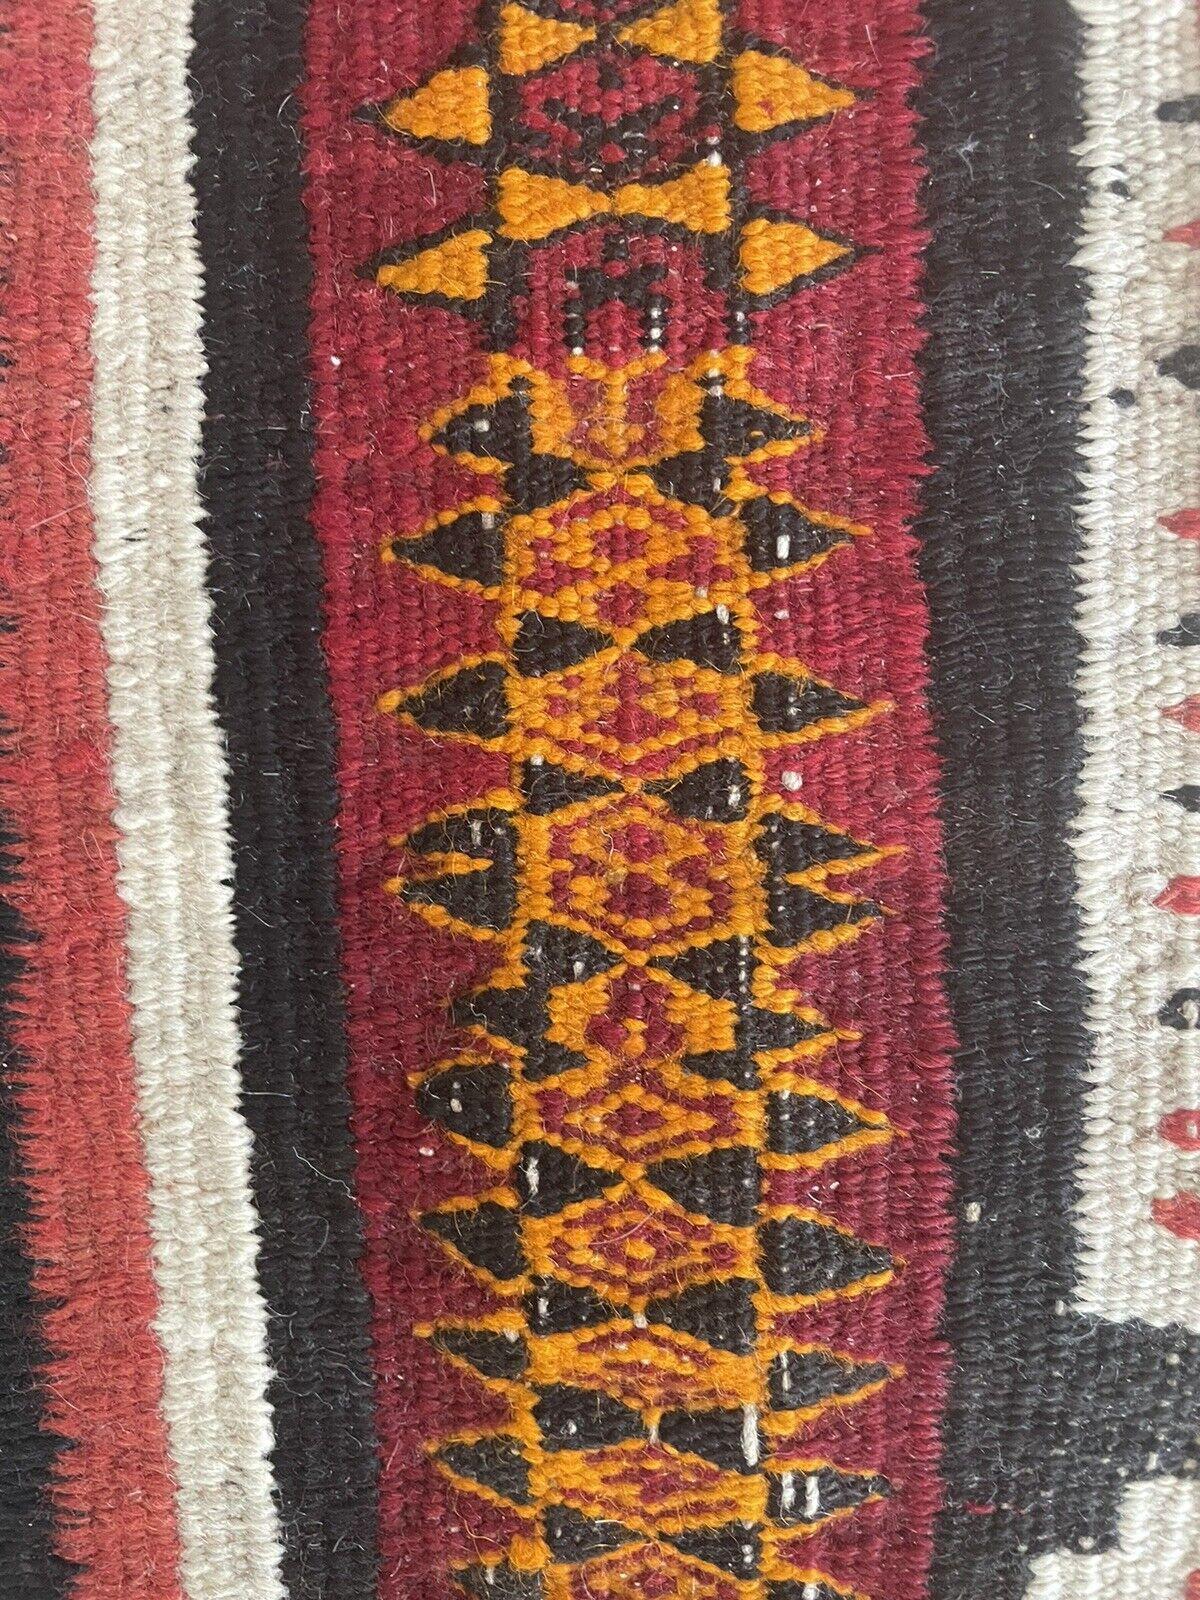 Handmade Antique Moroccan Berber Kilim Rug 1.9' x 3.1', 1920s - 1N10 In Good Condition For Sale In Bordeaux, FR